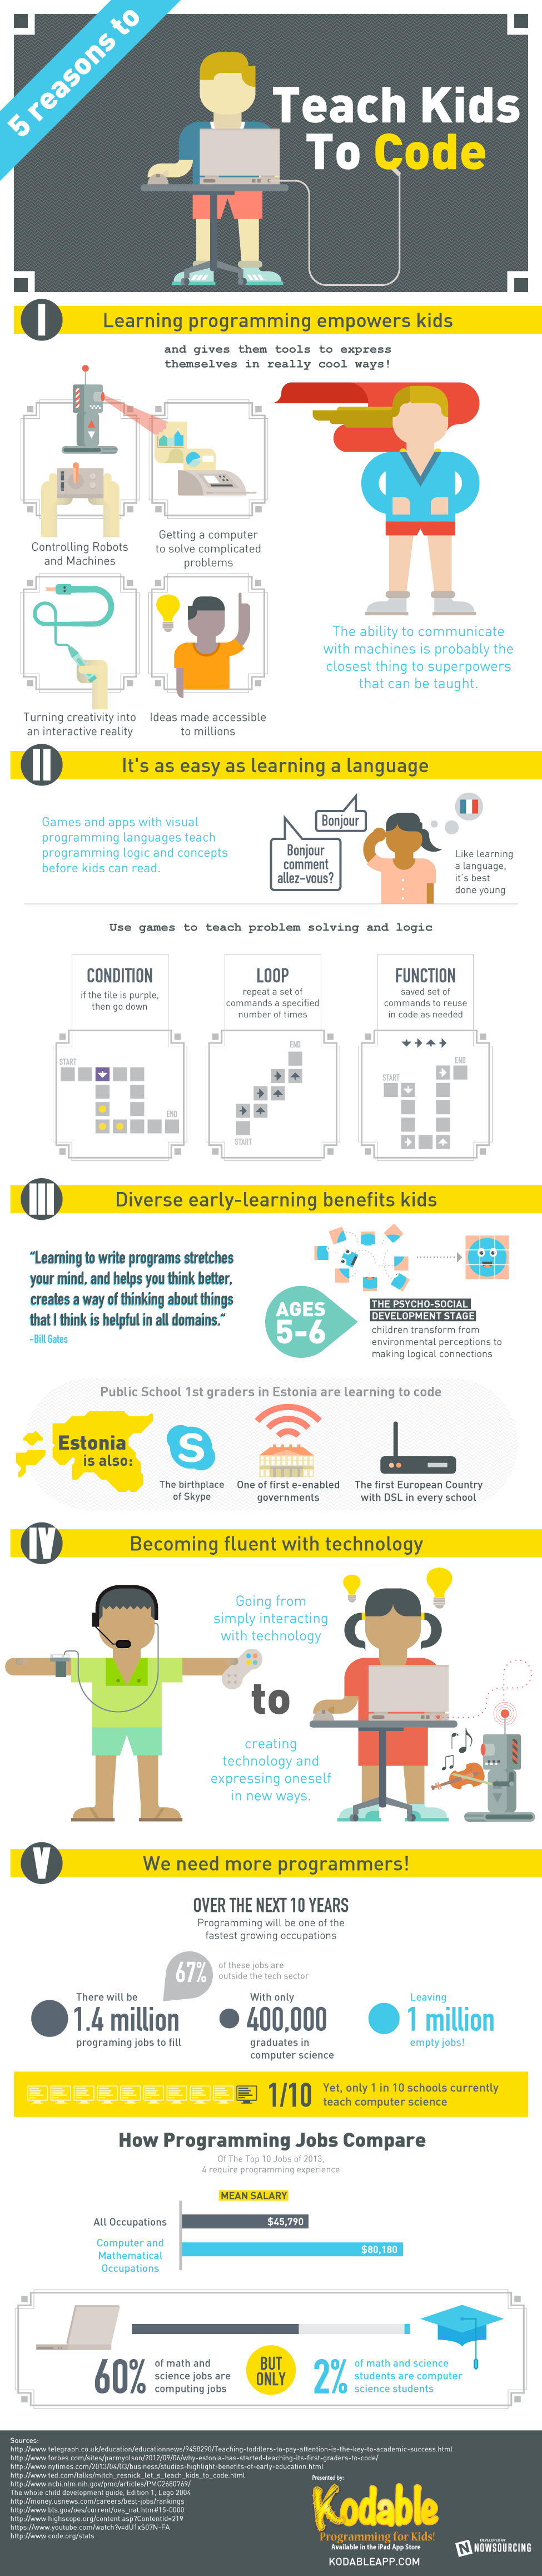 5 Reasons to Teach Kids to Code Infographic